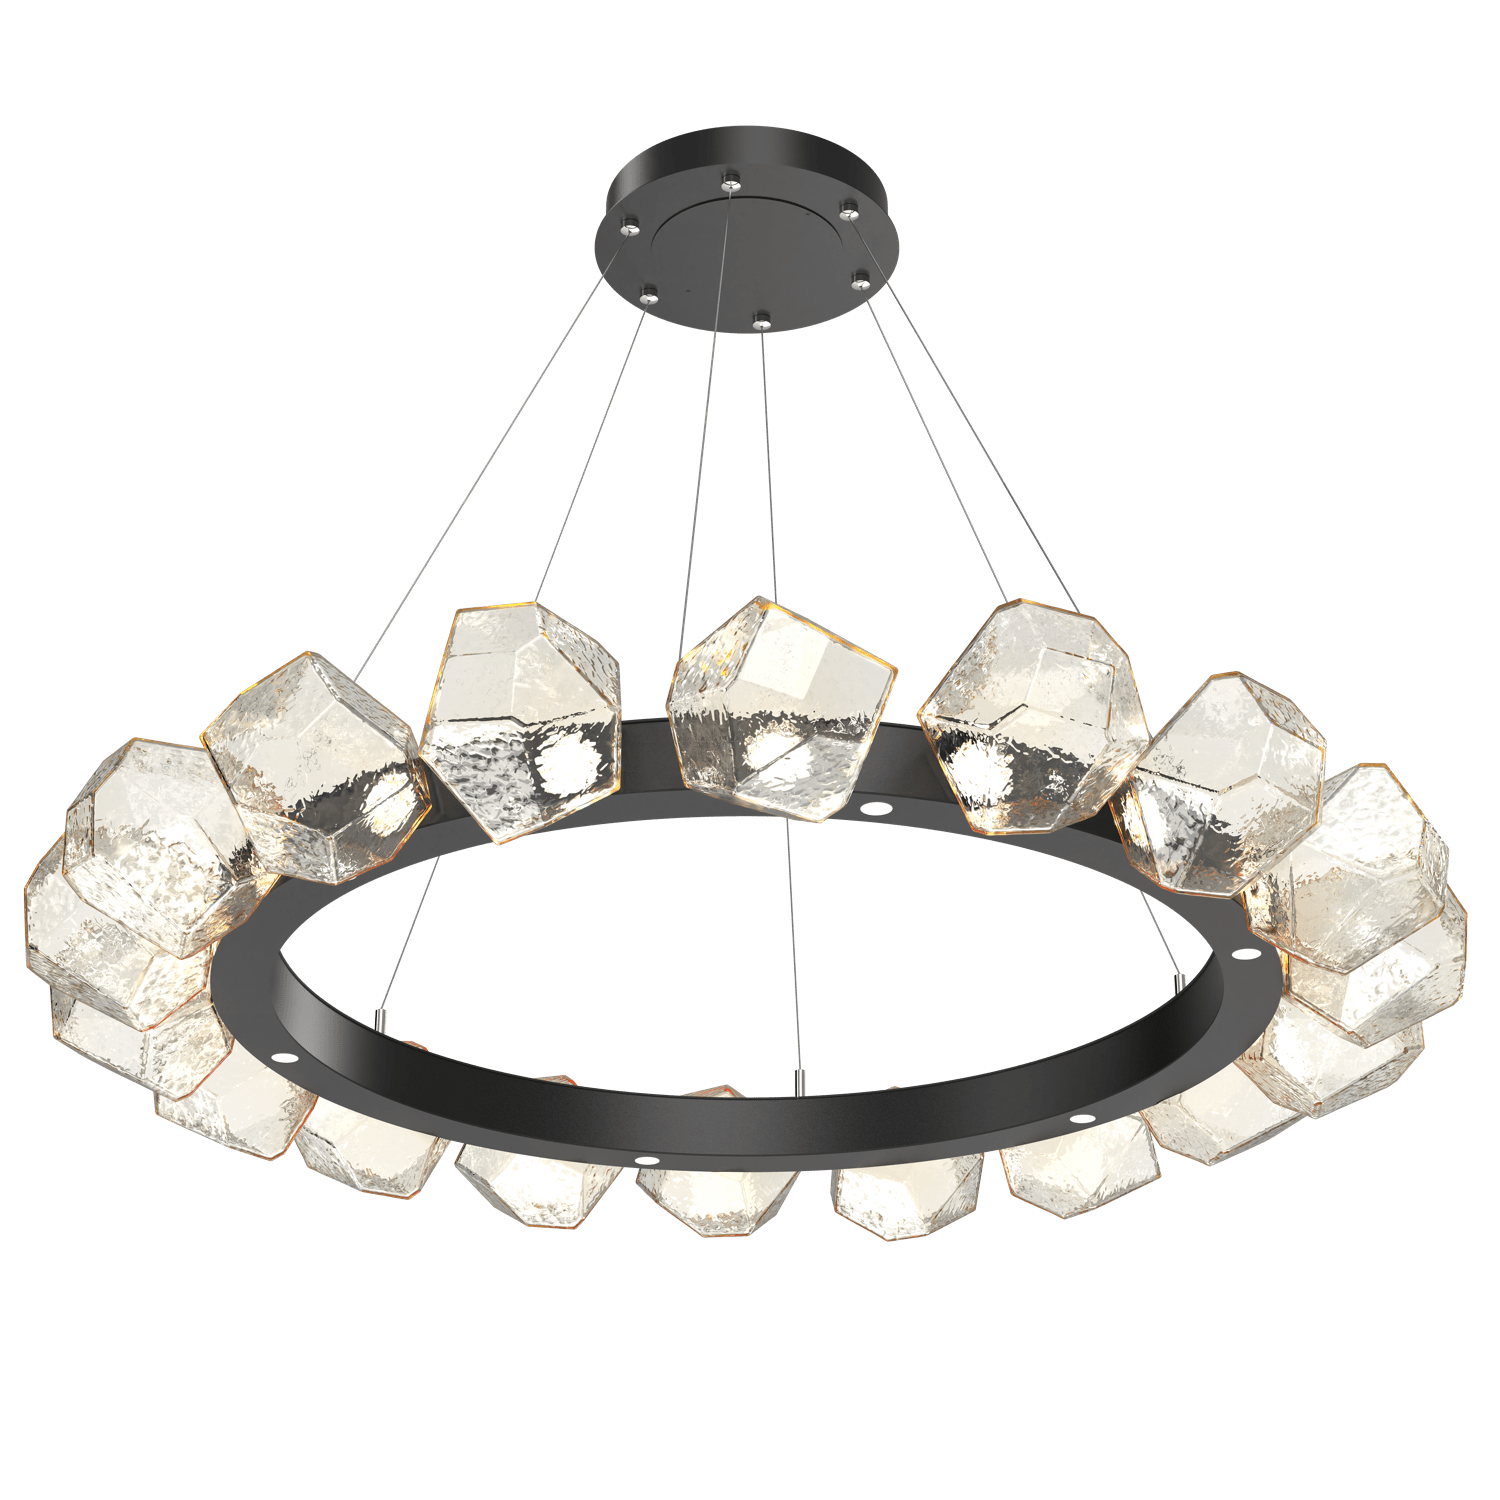 CHB0039-48-MB-A-Hammerton-Studio-Gem-48-inch-radial-ring-chandelier-with-matte-black-finish-and-amber-blown-glass-shades-and-LED-lamping